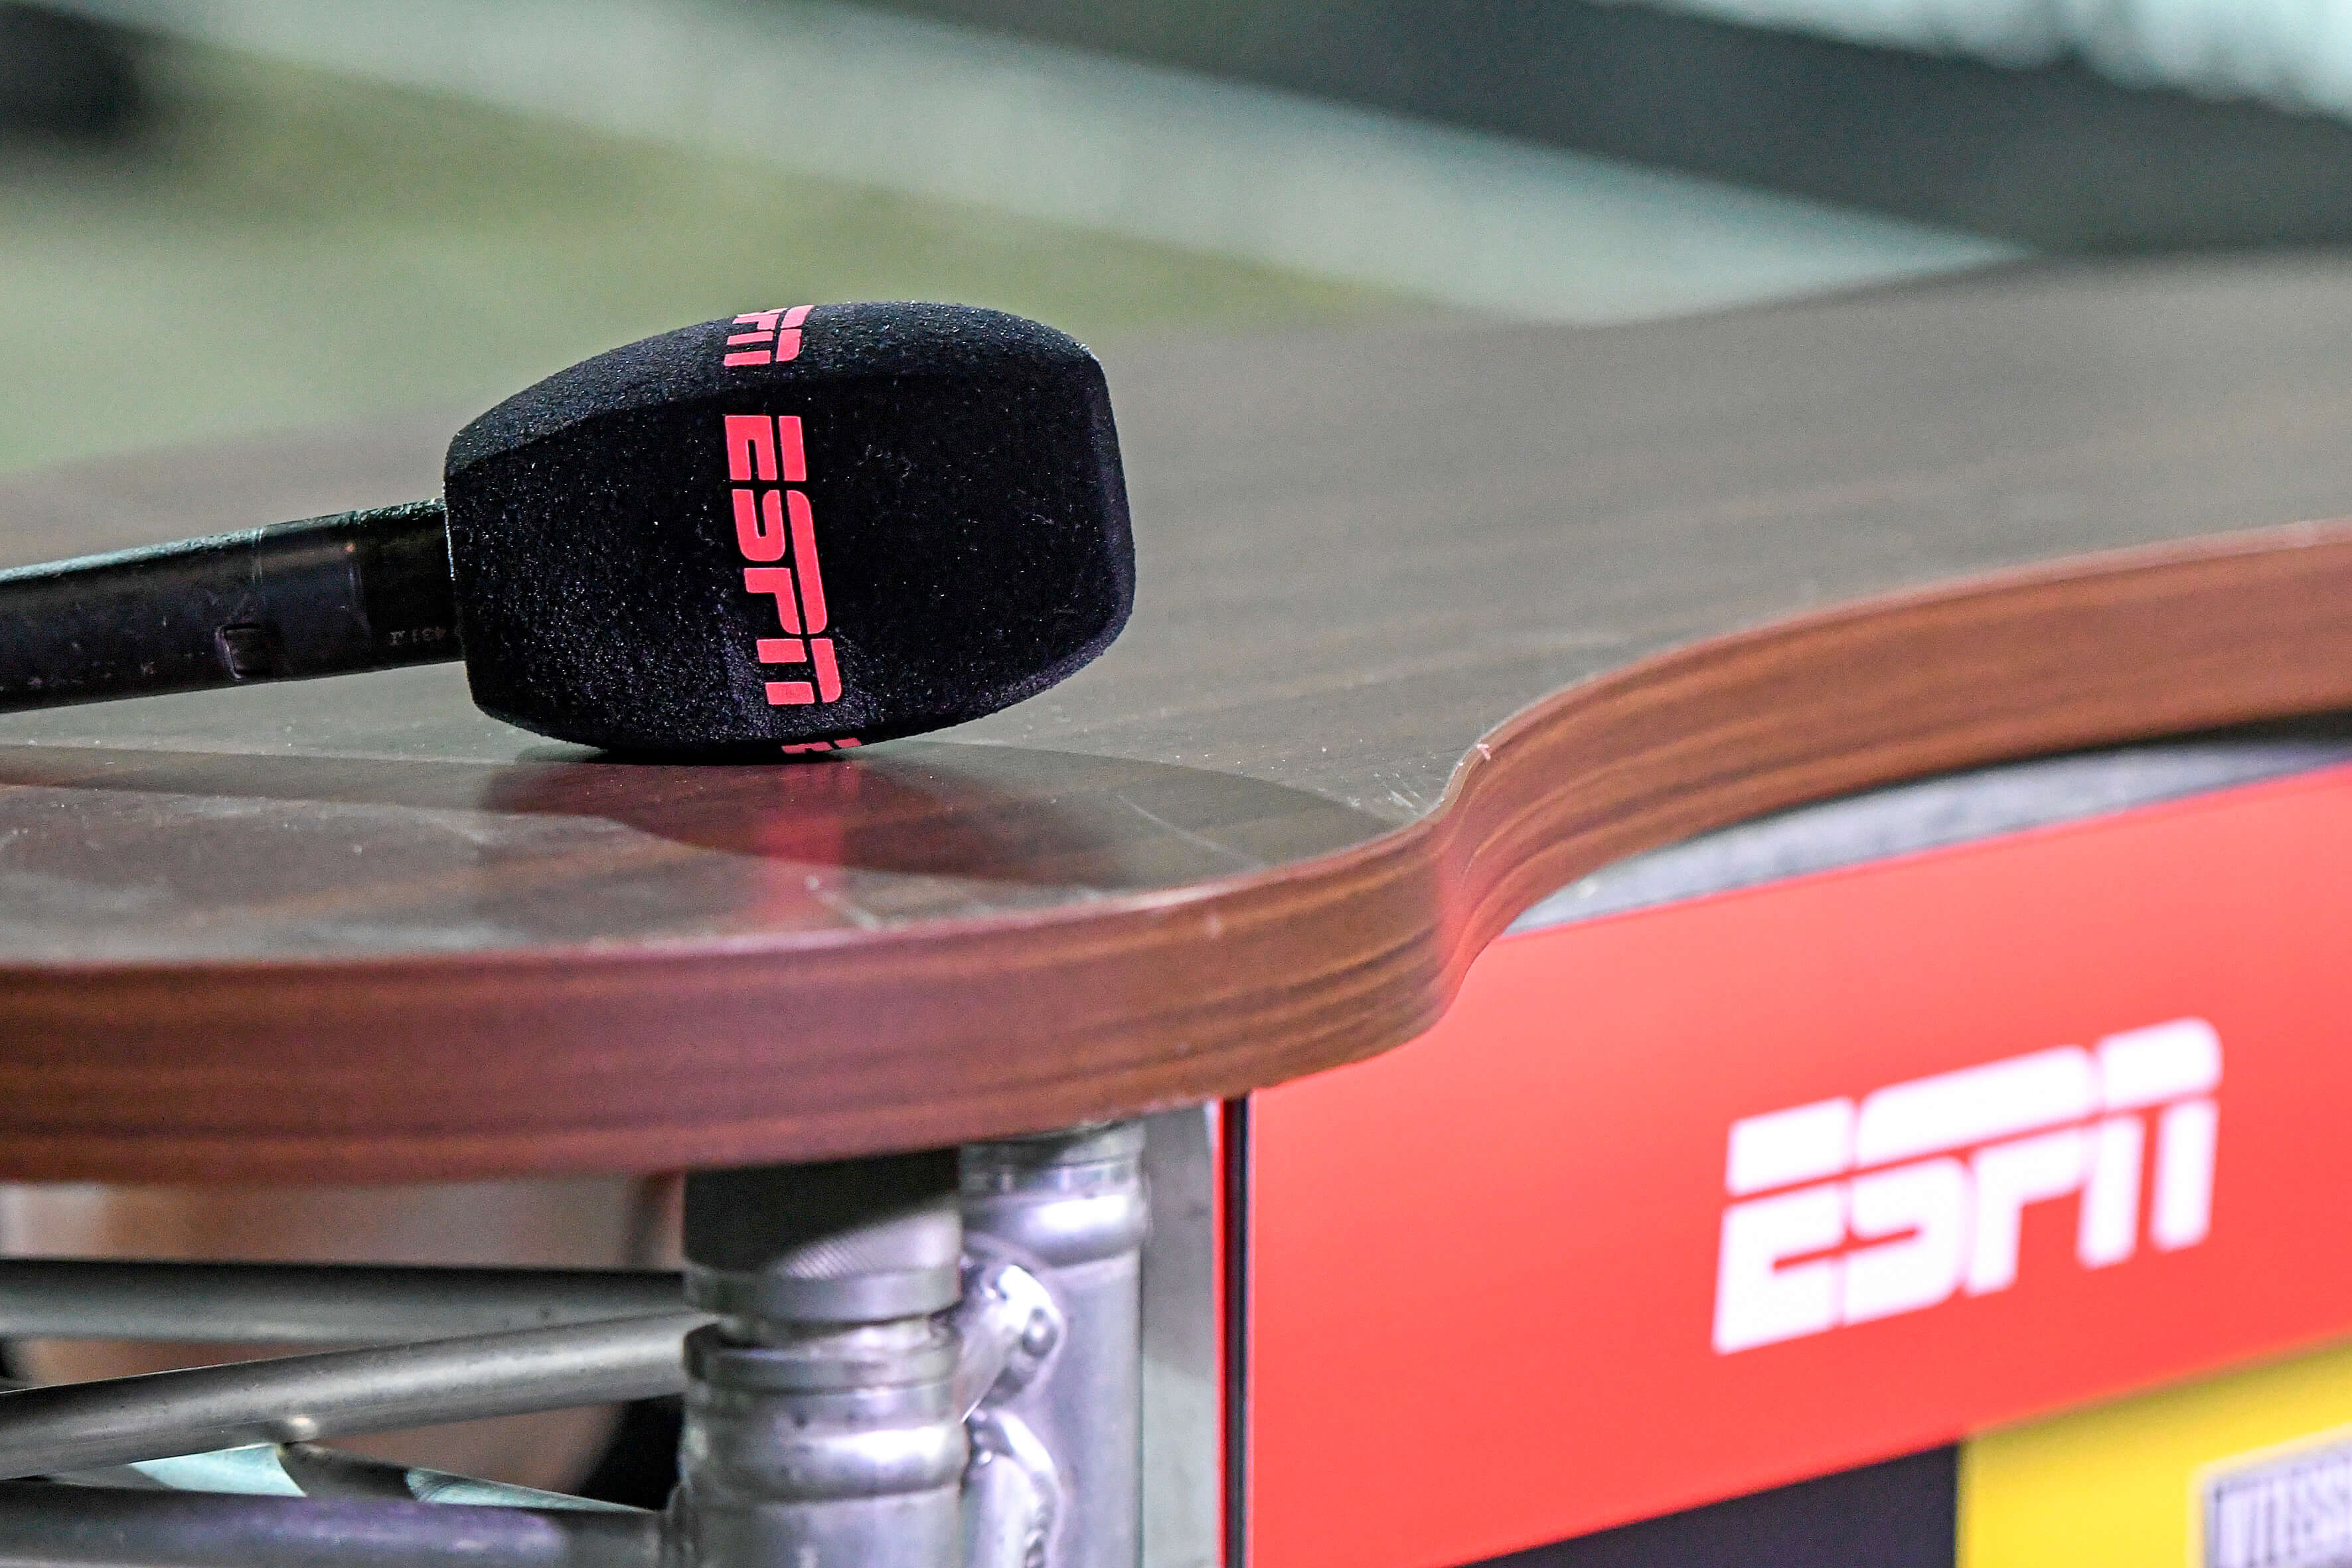 How To Bet - Did PENN Investors Throw a Brushback Pitch at the ESPN BET Operator?